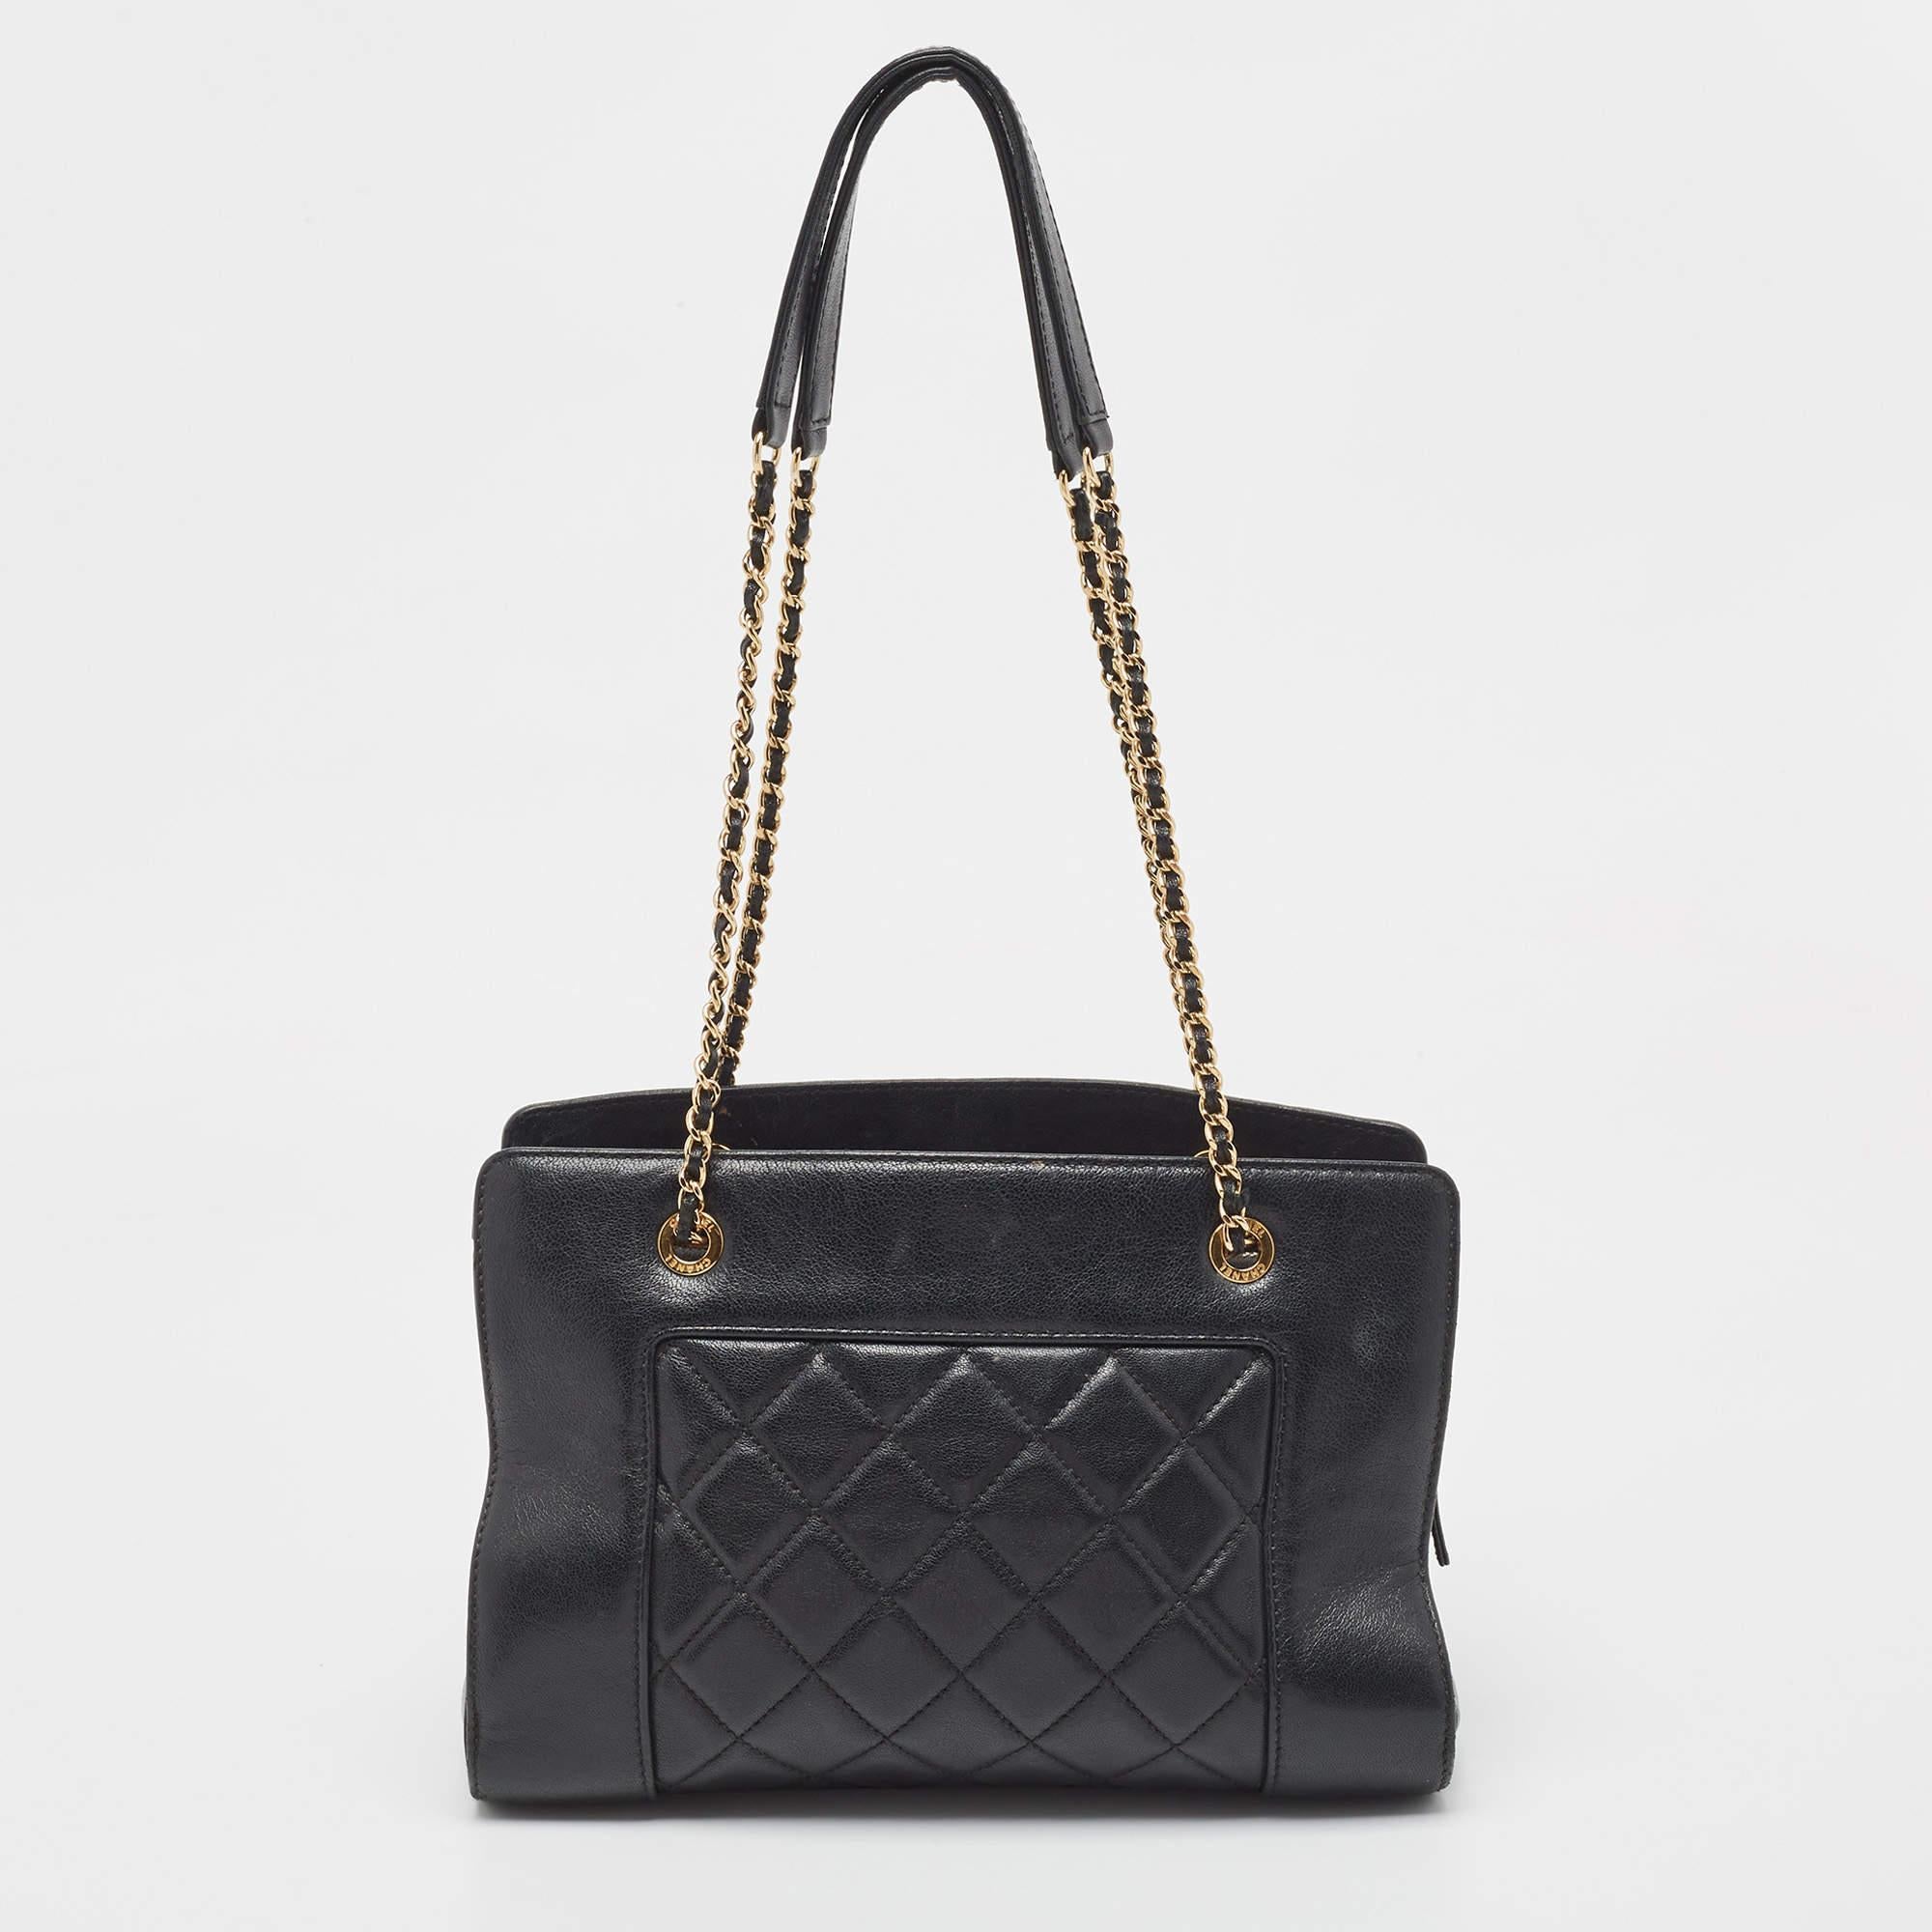 Chanel Black Quilted Leather CC Chain Tote For Sale 6